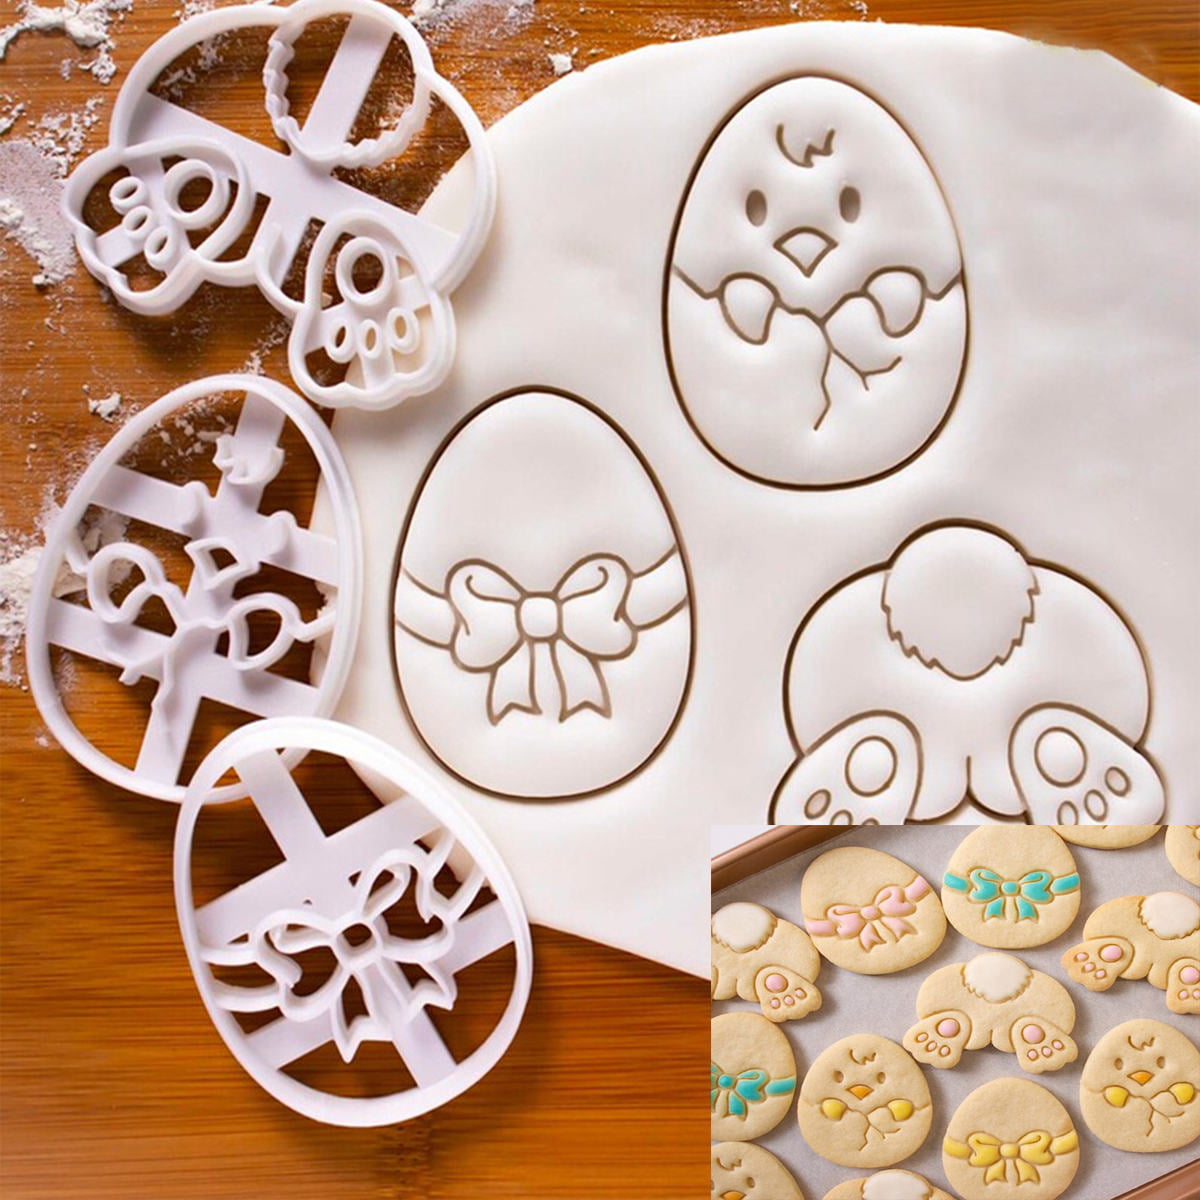 Extra Durable! Sheep Cookie Fondant Cutter Set Large Sizes 